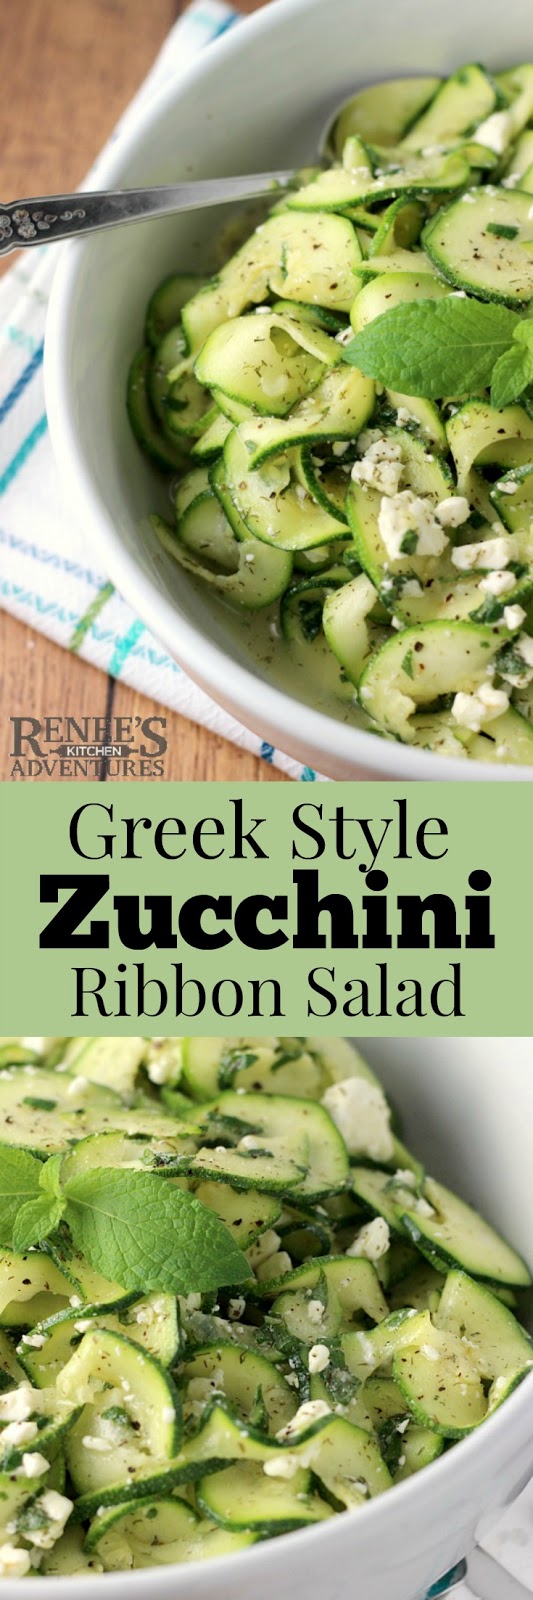 Greek Style Zucchini Ribbon Salad | by Renee's Kitchen Adventures is an easy, healthy recipe for raw zucchini salad. #rkarecipes #zucchini 